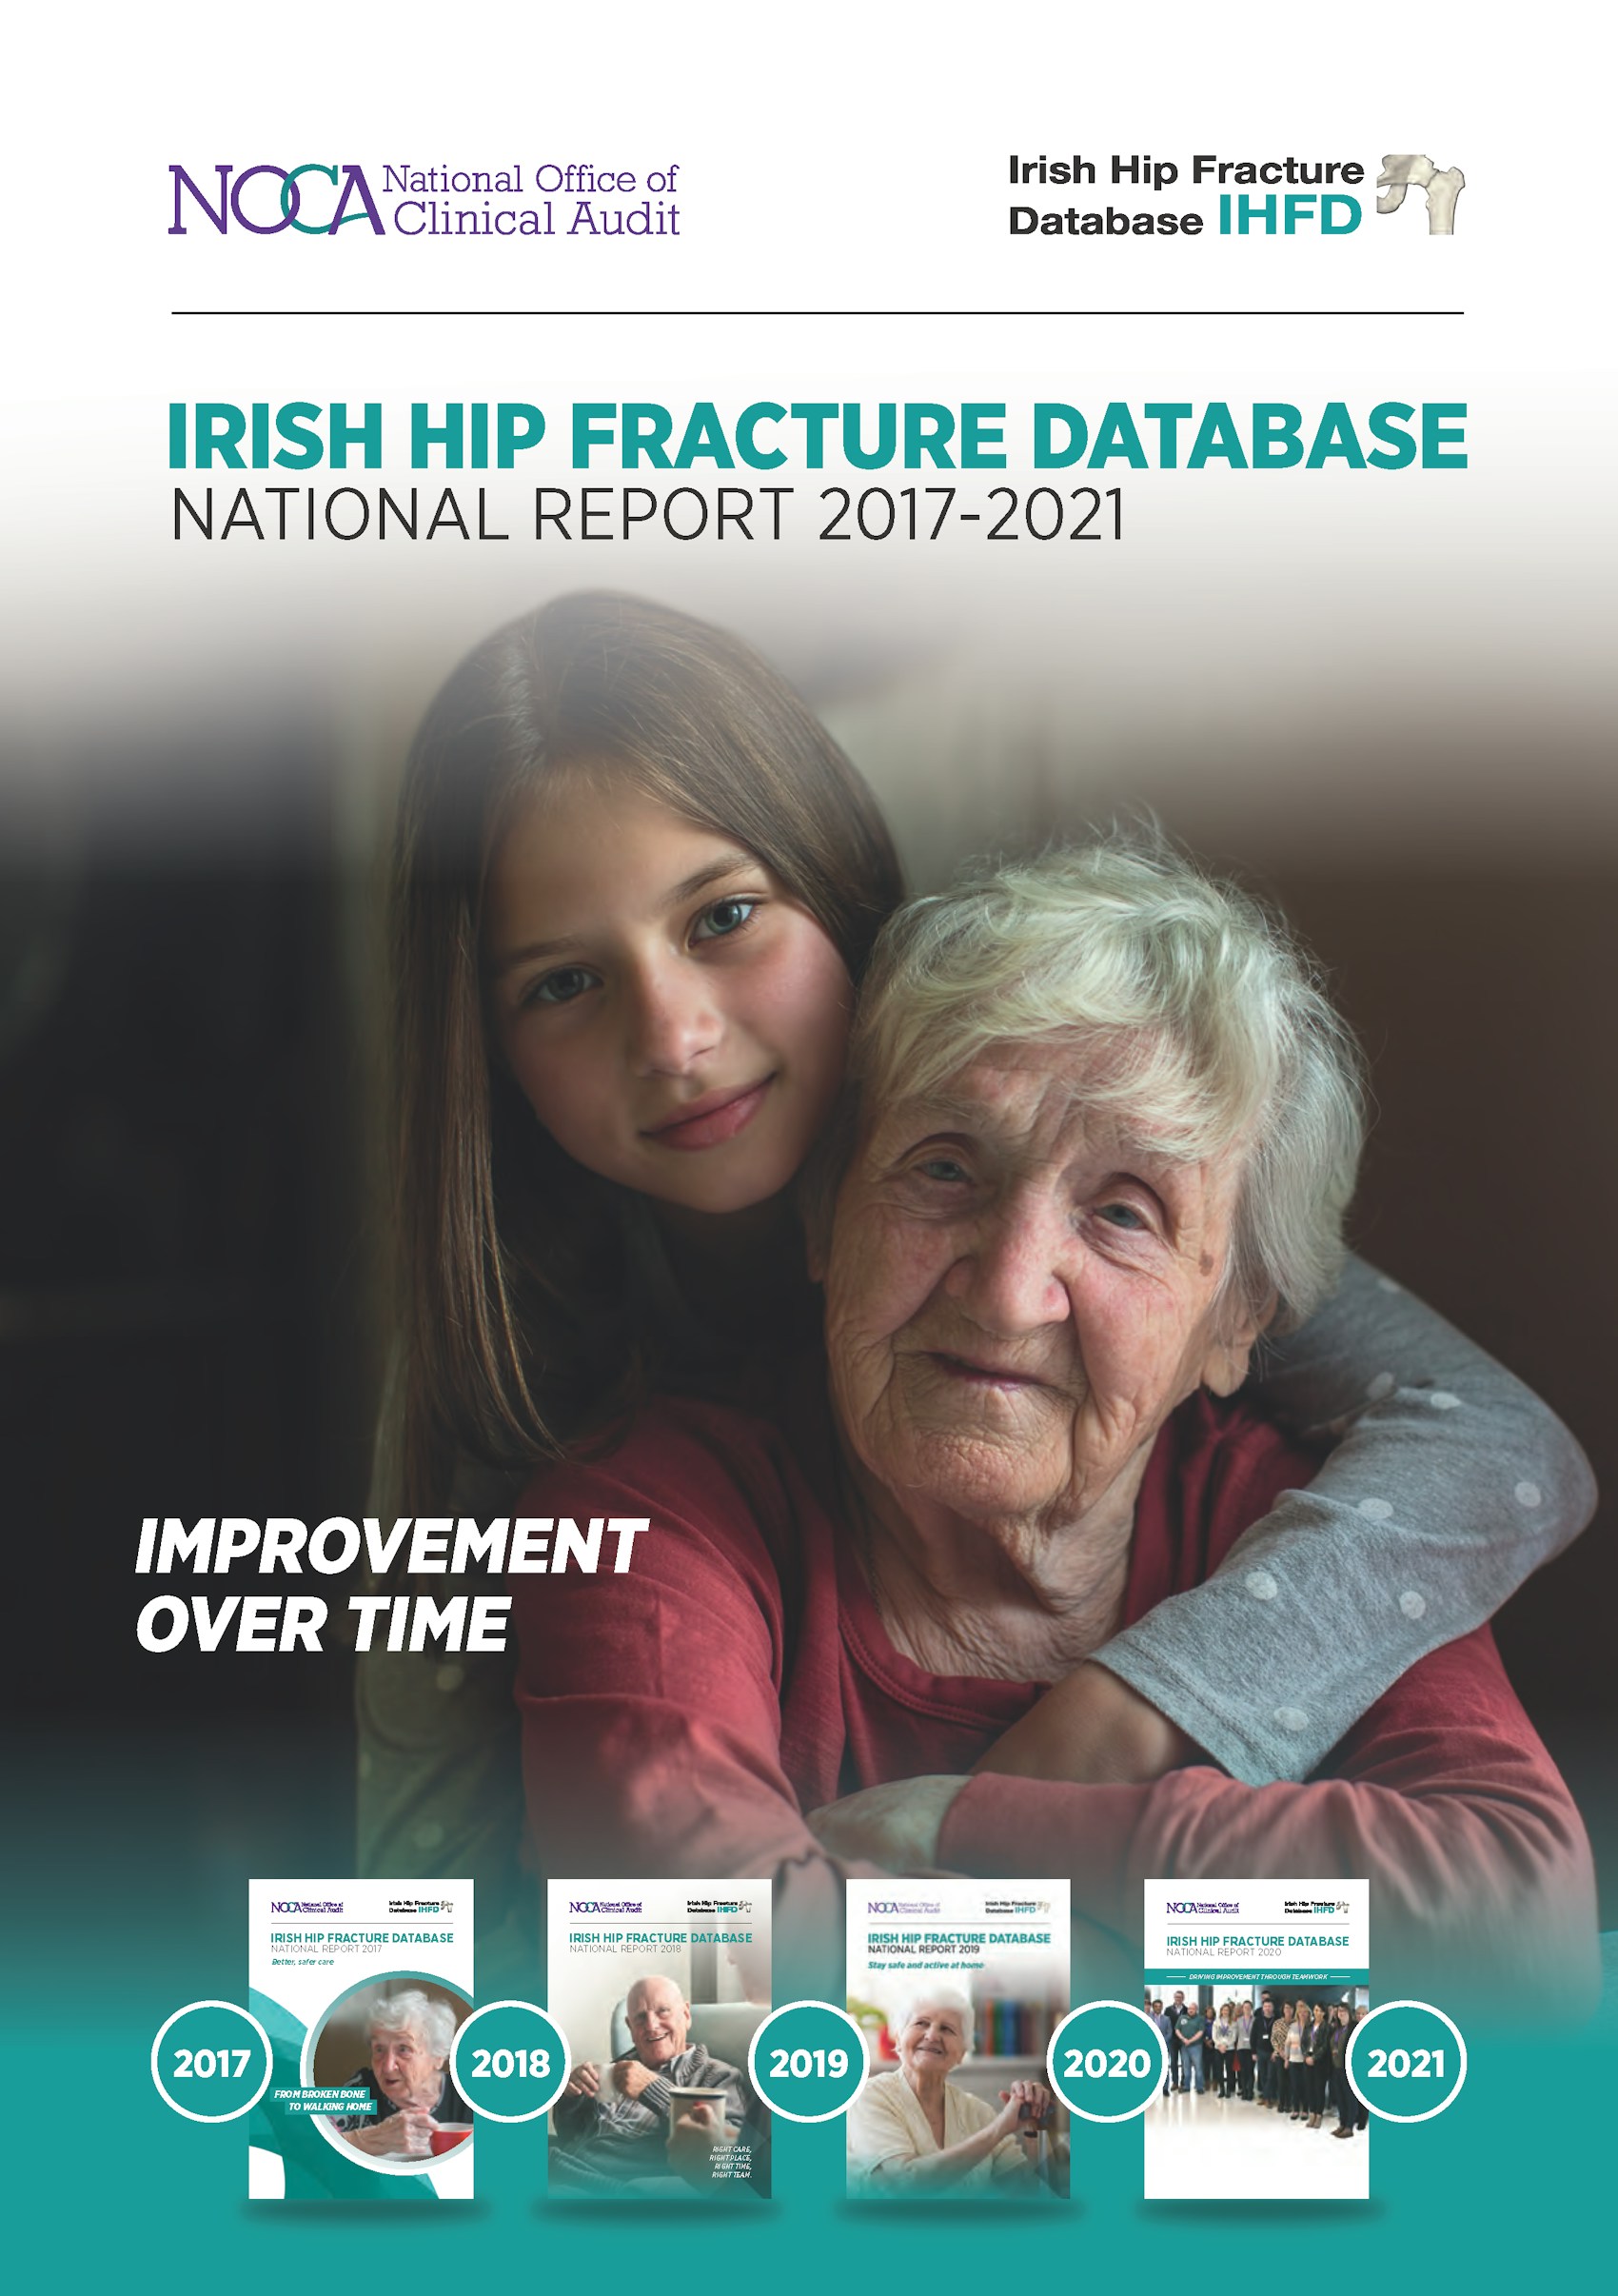 Launch of the Irish Hip Fracture Database 2017-2021